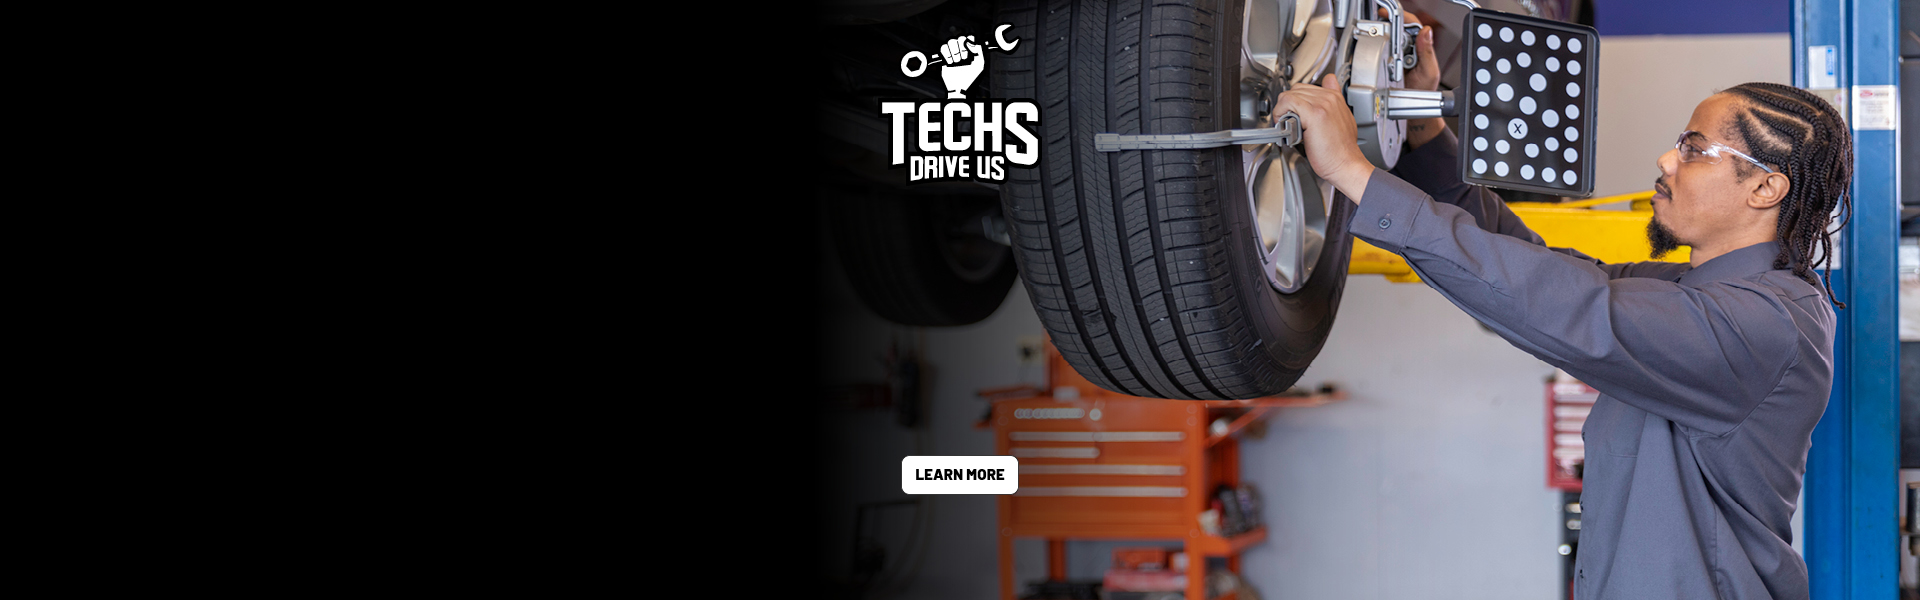 Free alignment with the purchase of 4 select tires coupon promo image